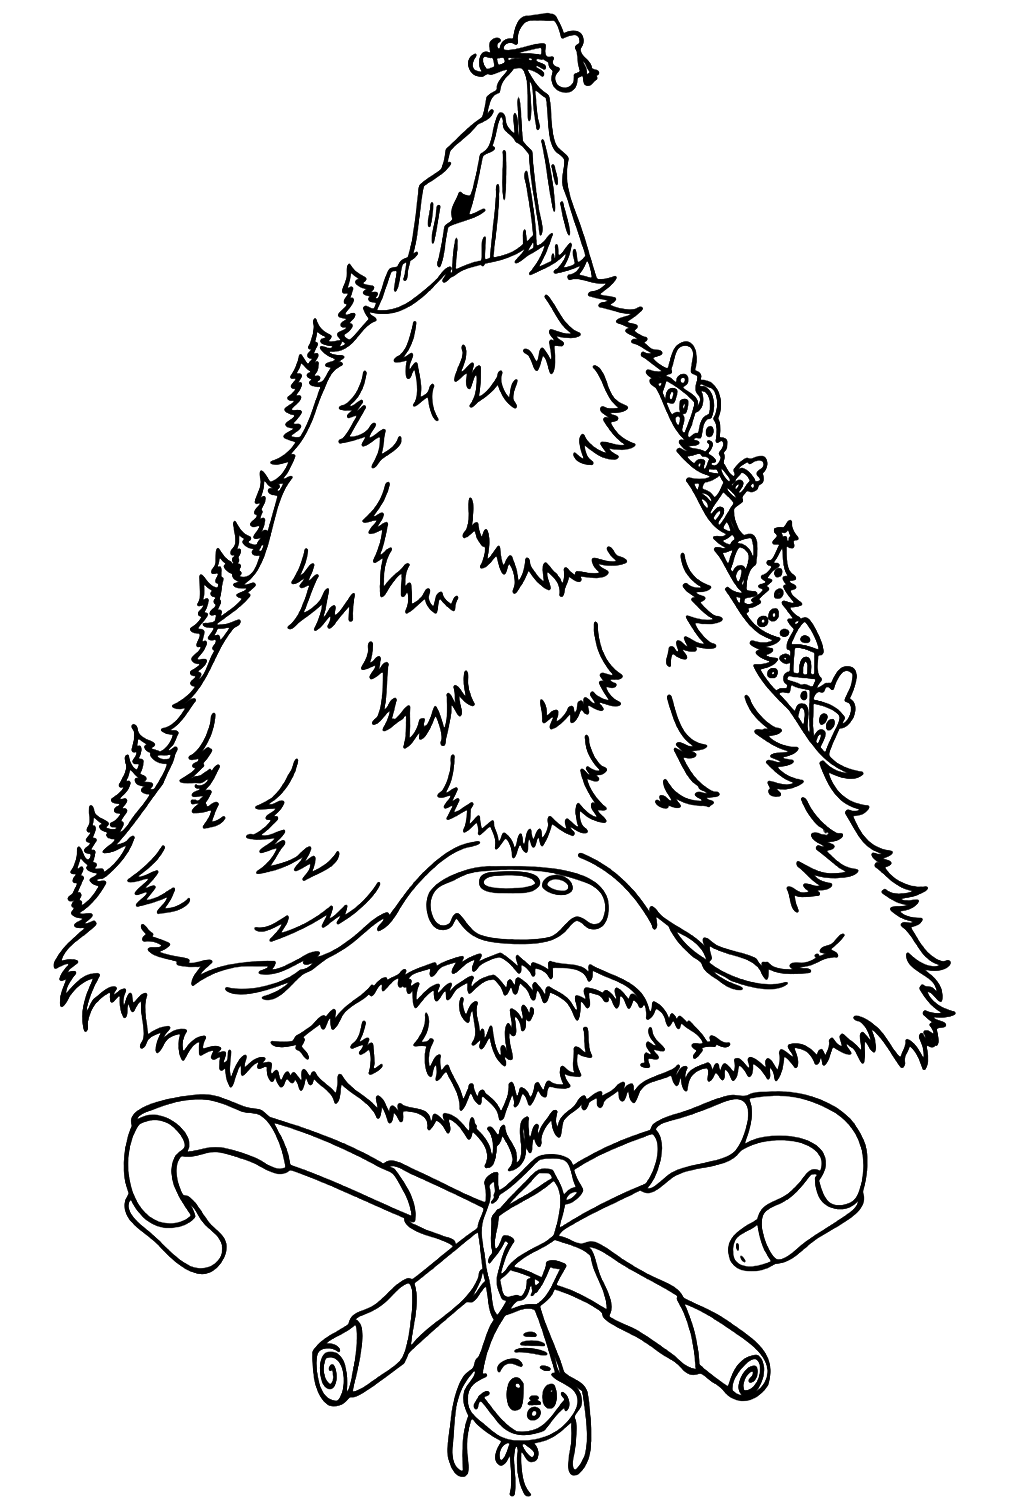 Snowy Mount Crumpit Where Grinch Resides Coloring Pages